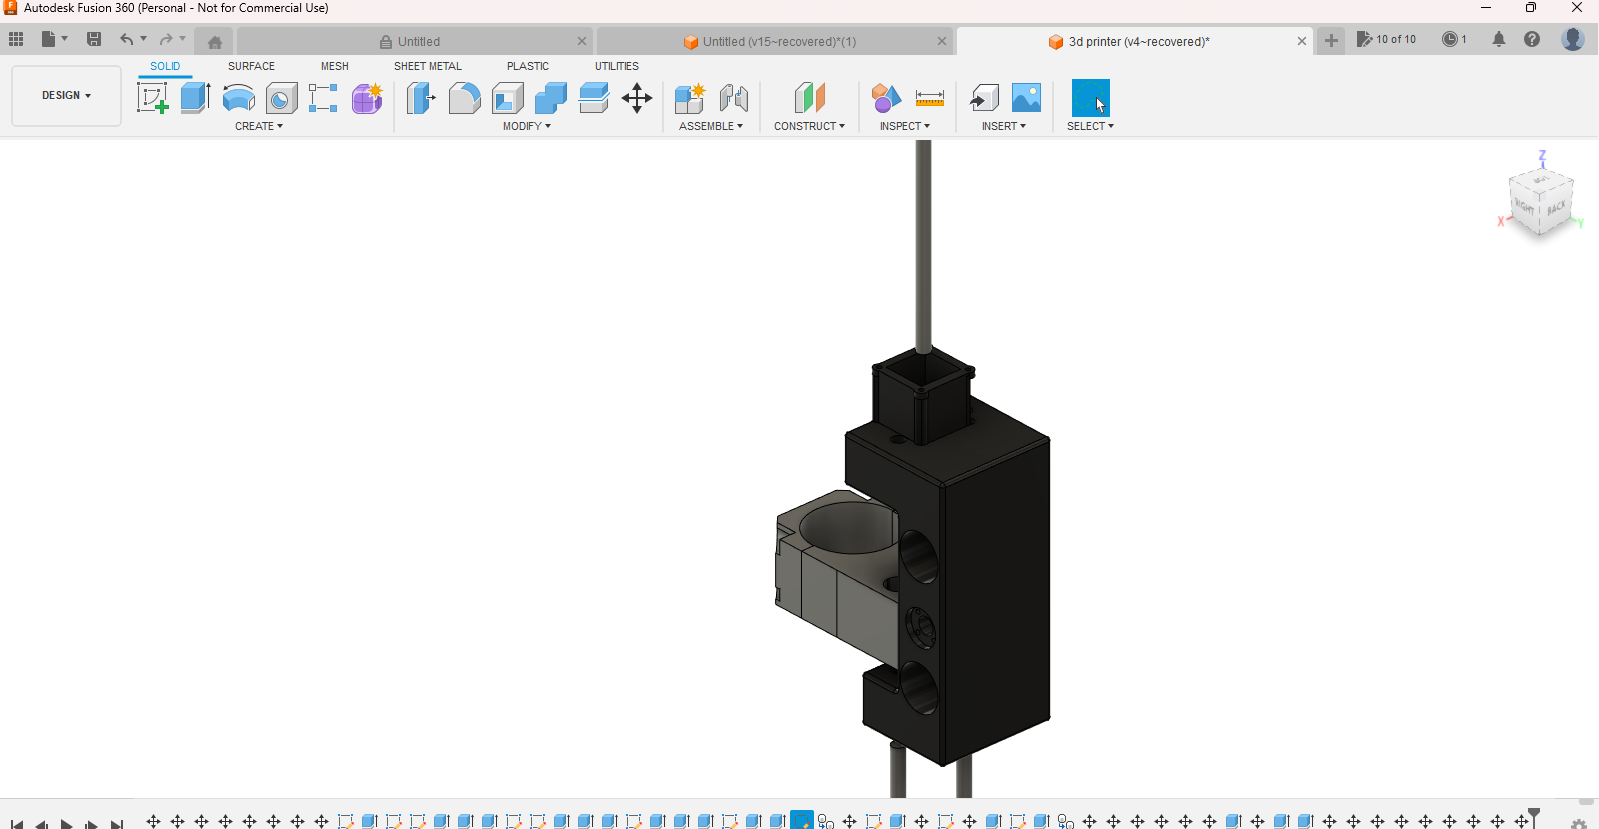 Autodesk Fusion 360 (Personal - Not for Commercial Use) 5_31_2023 7_40_54 PM.png